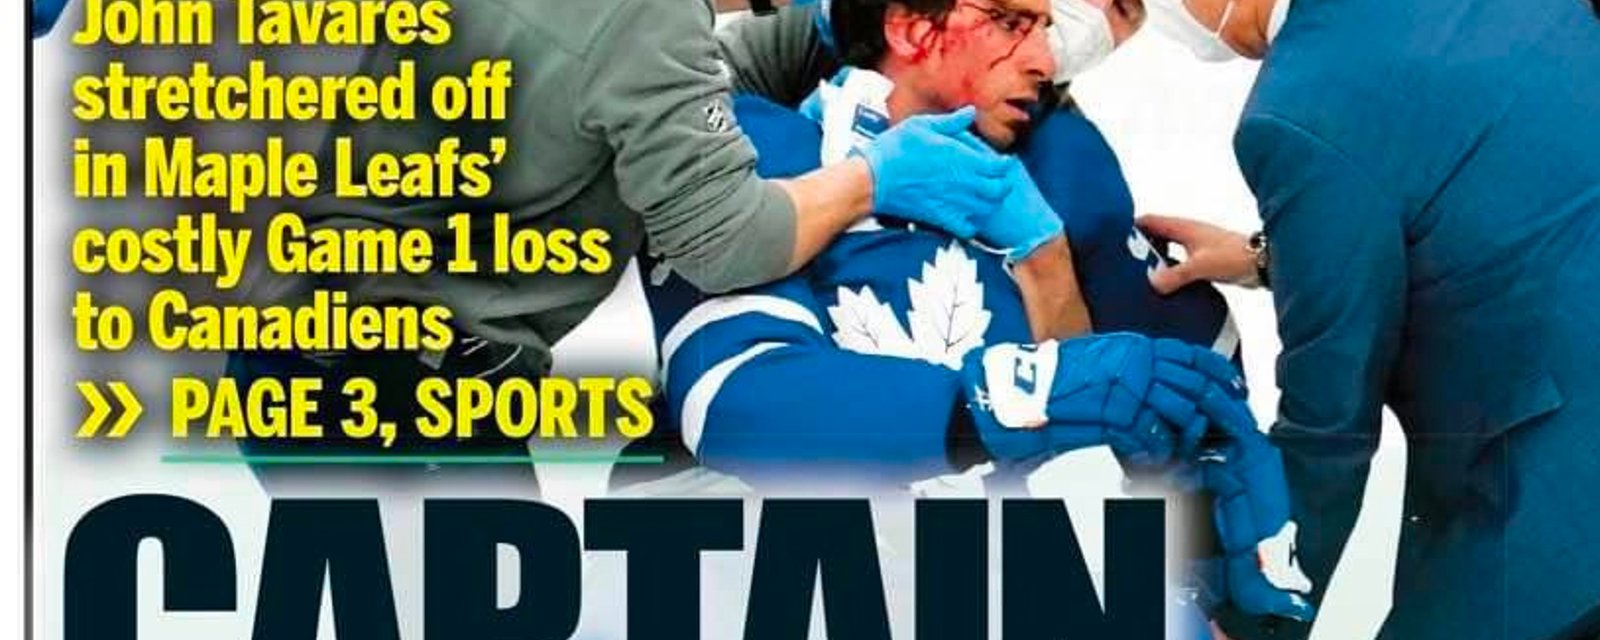 Toronto Sun and other medias in hot water over treatment of Tavares’ injury 